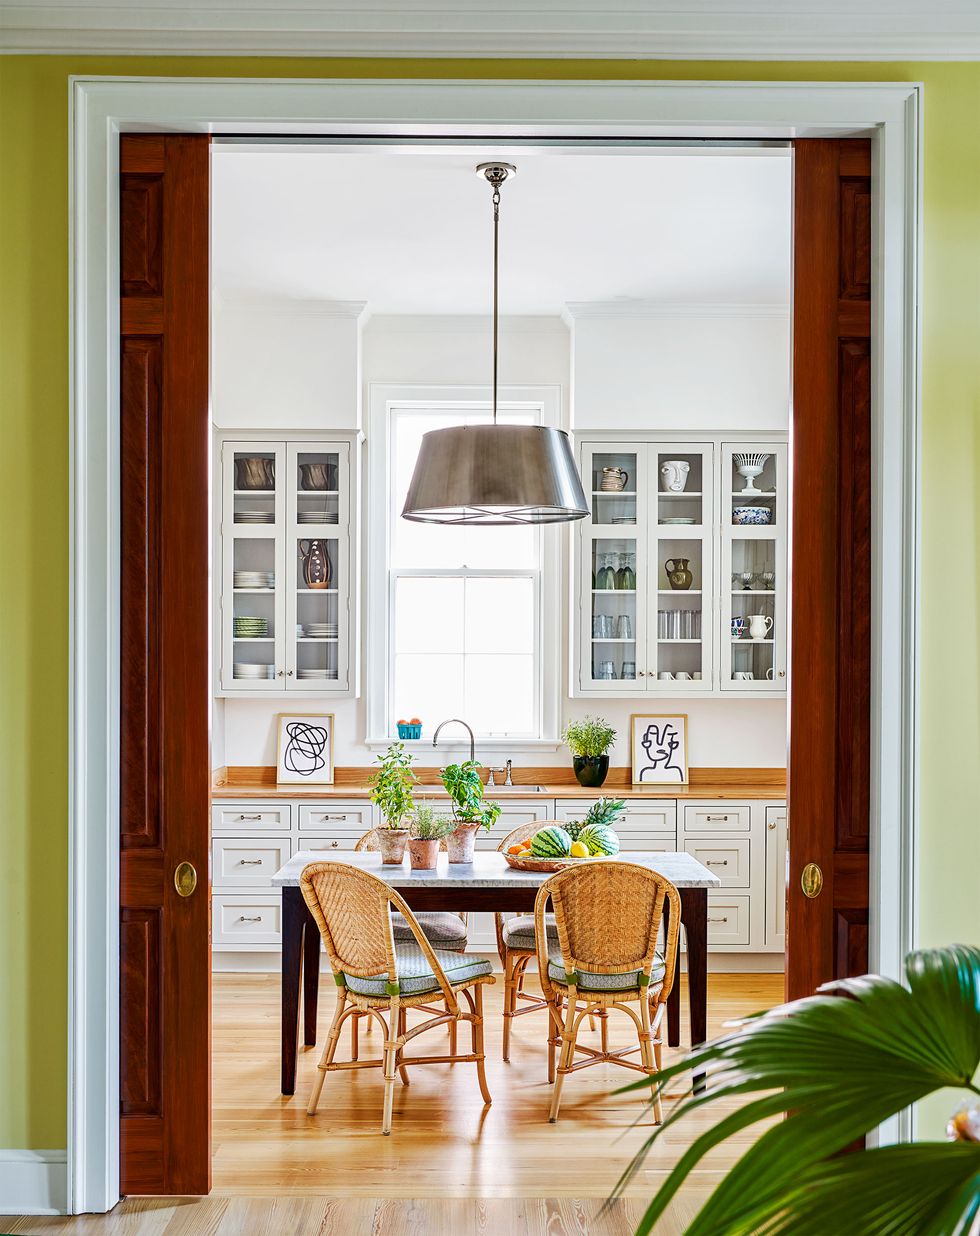 view through a pocket doorway with yellow walls and white trim into the kitchen with a white wall cabinets and a small square table with rattan chairs pulled up to it